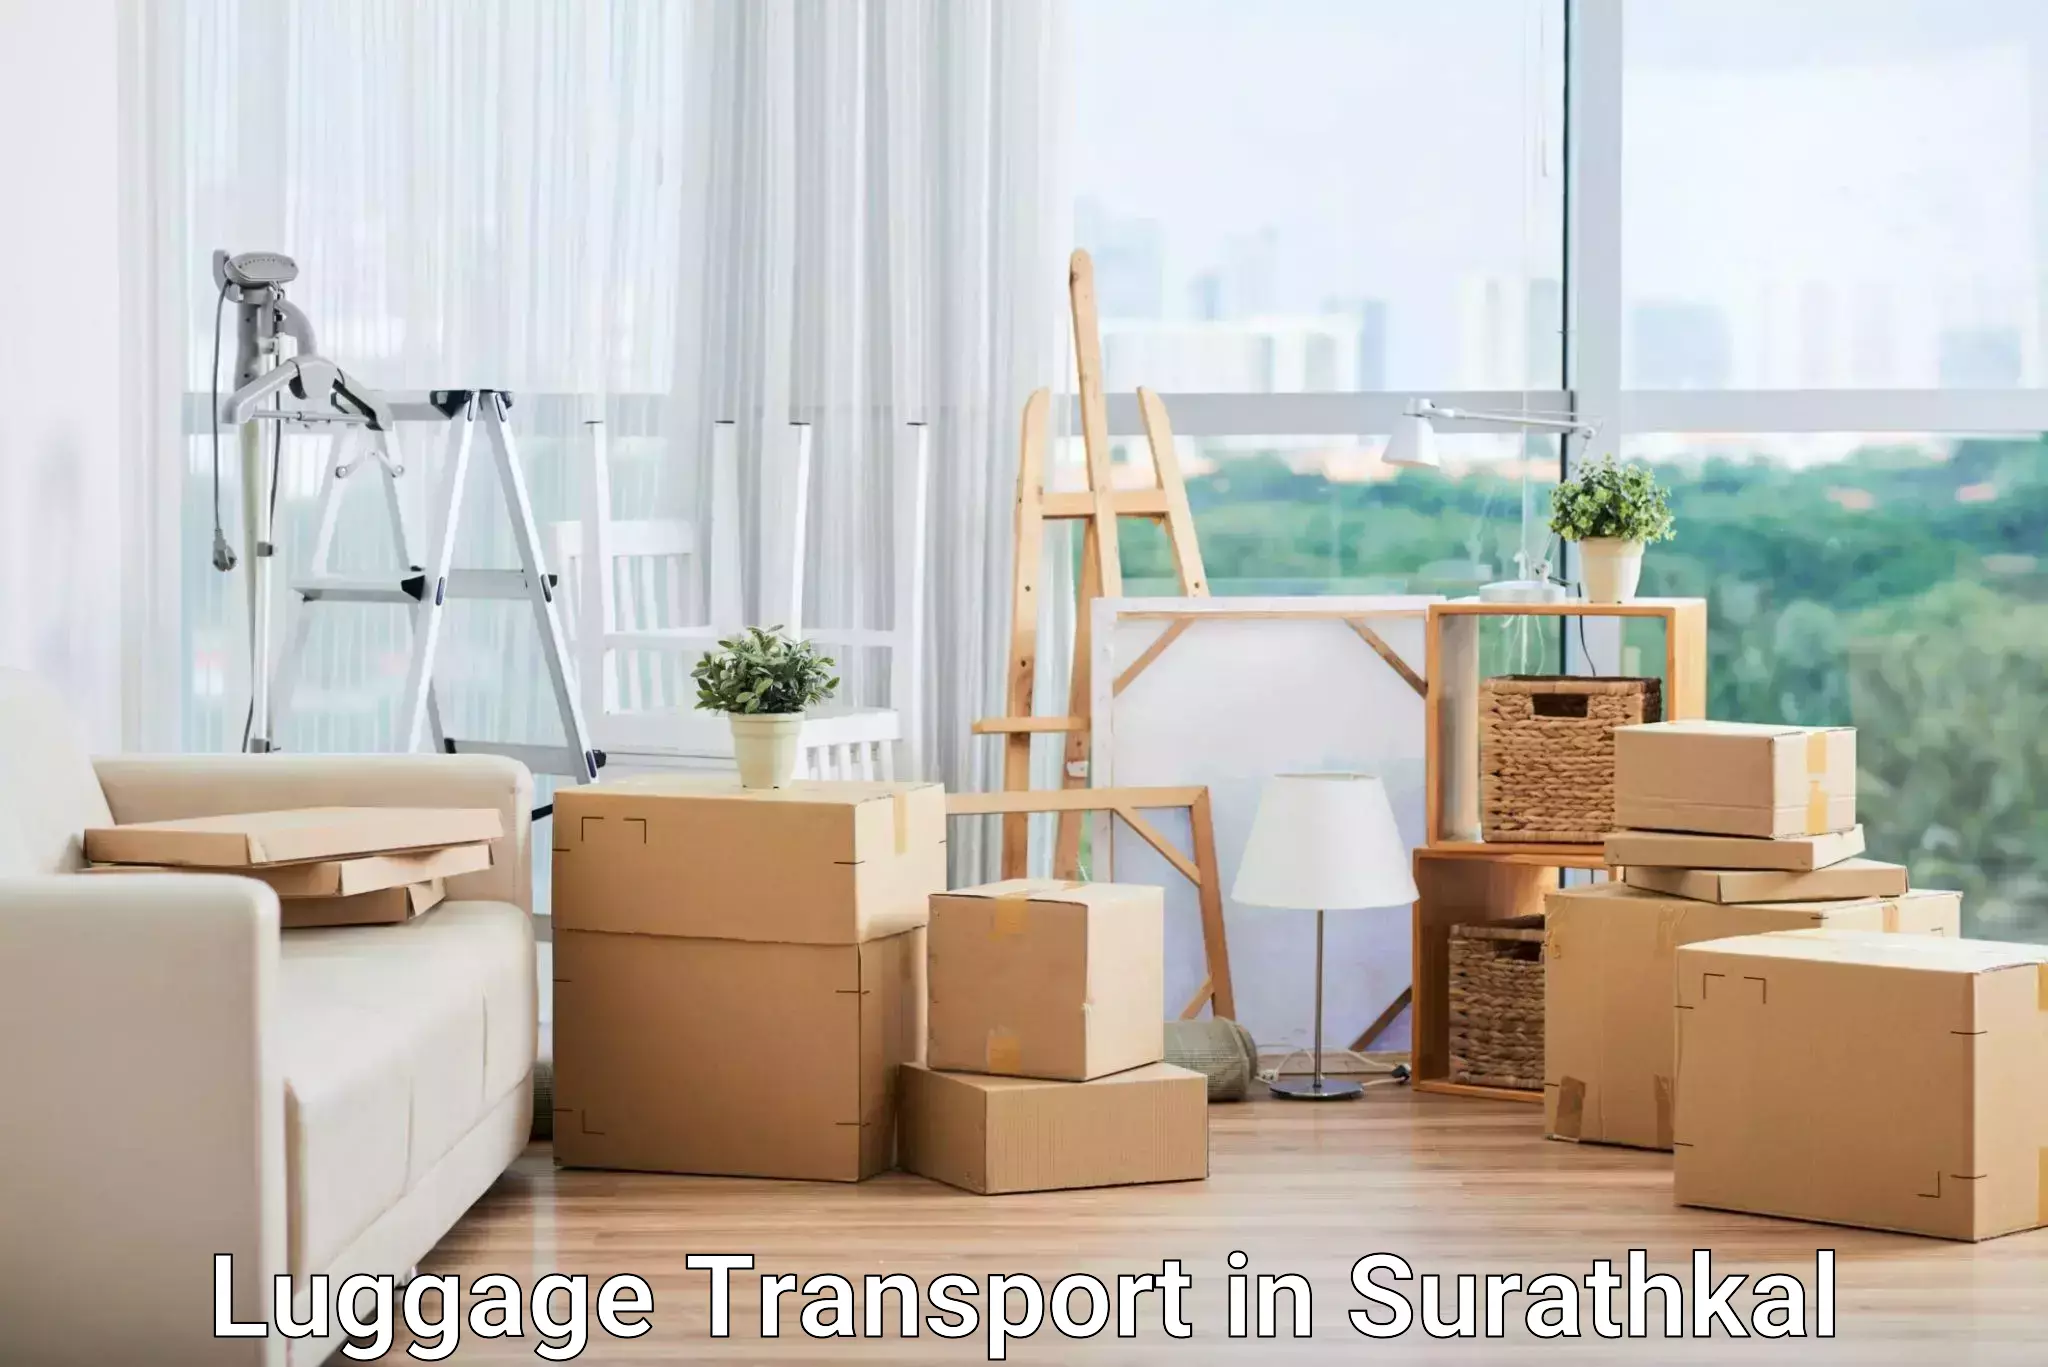 Luggage shipment specialists in Surathkal